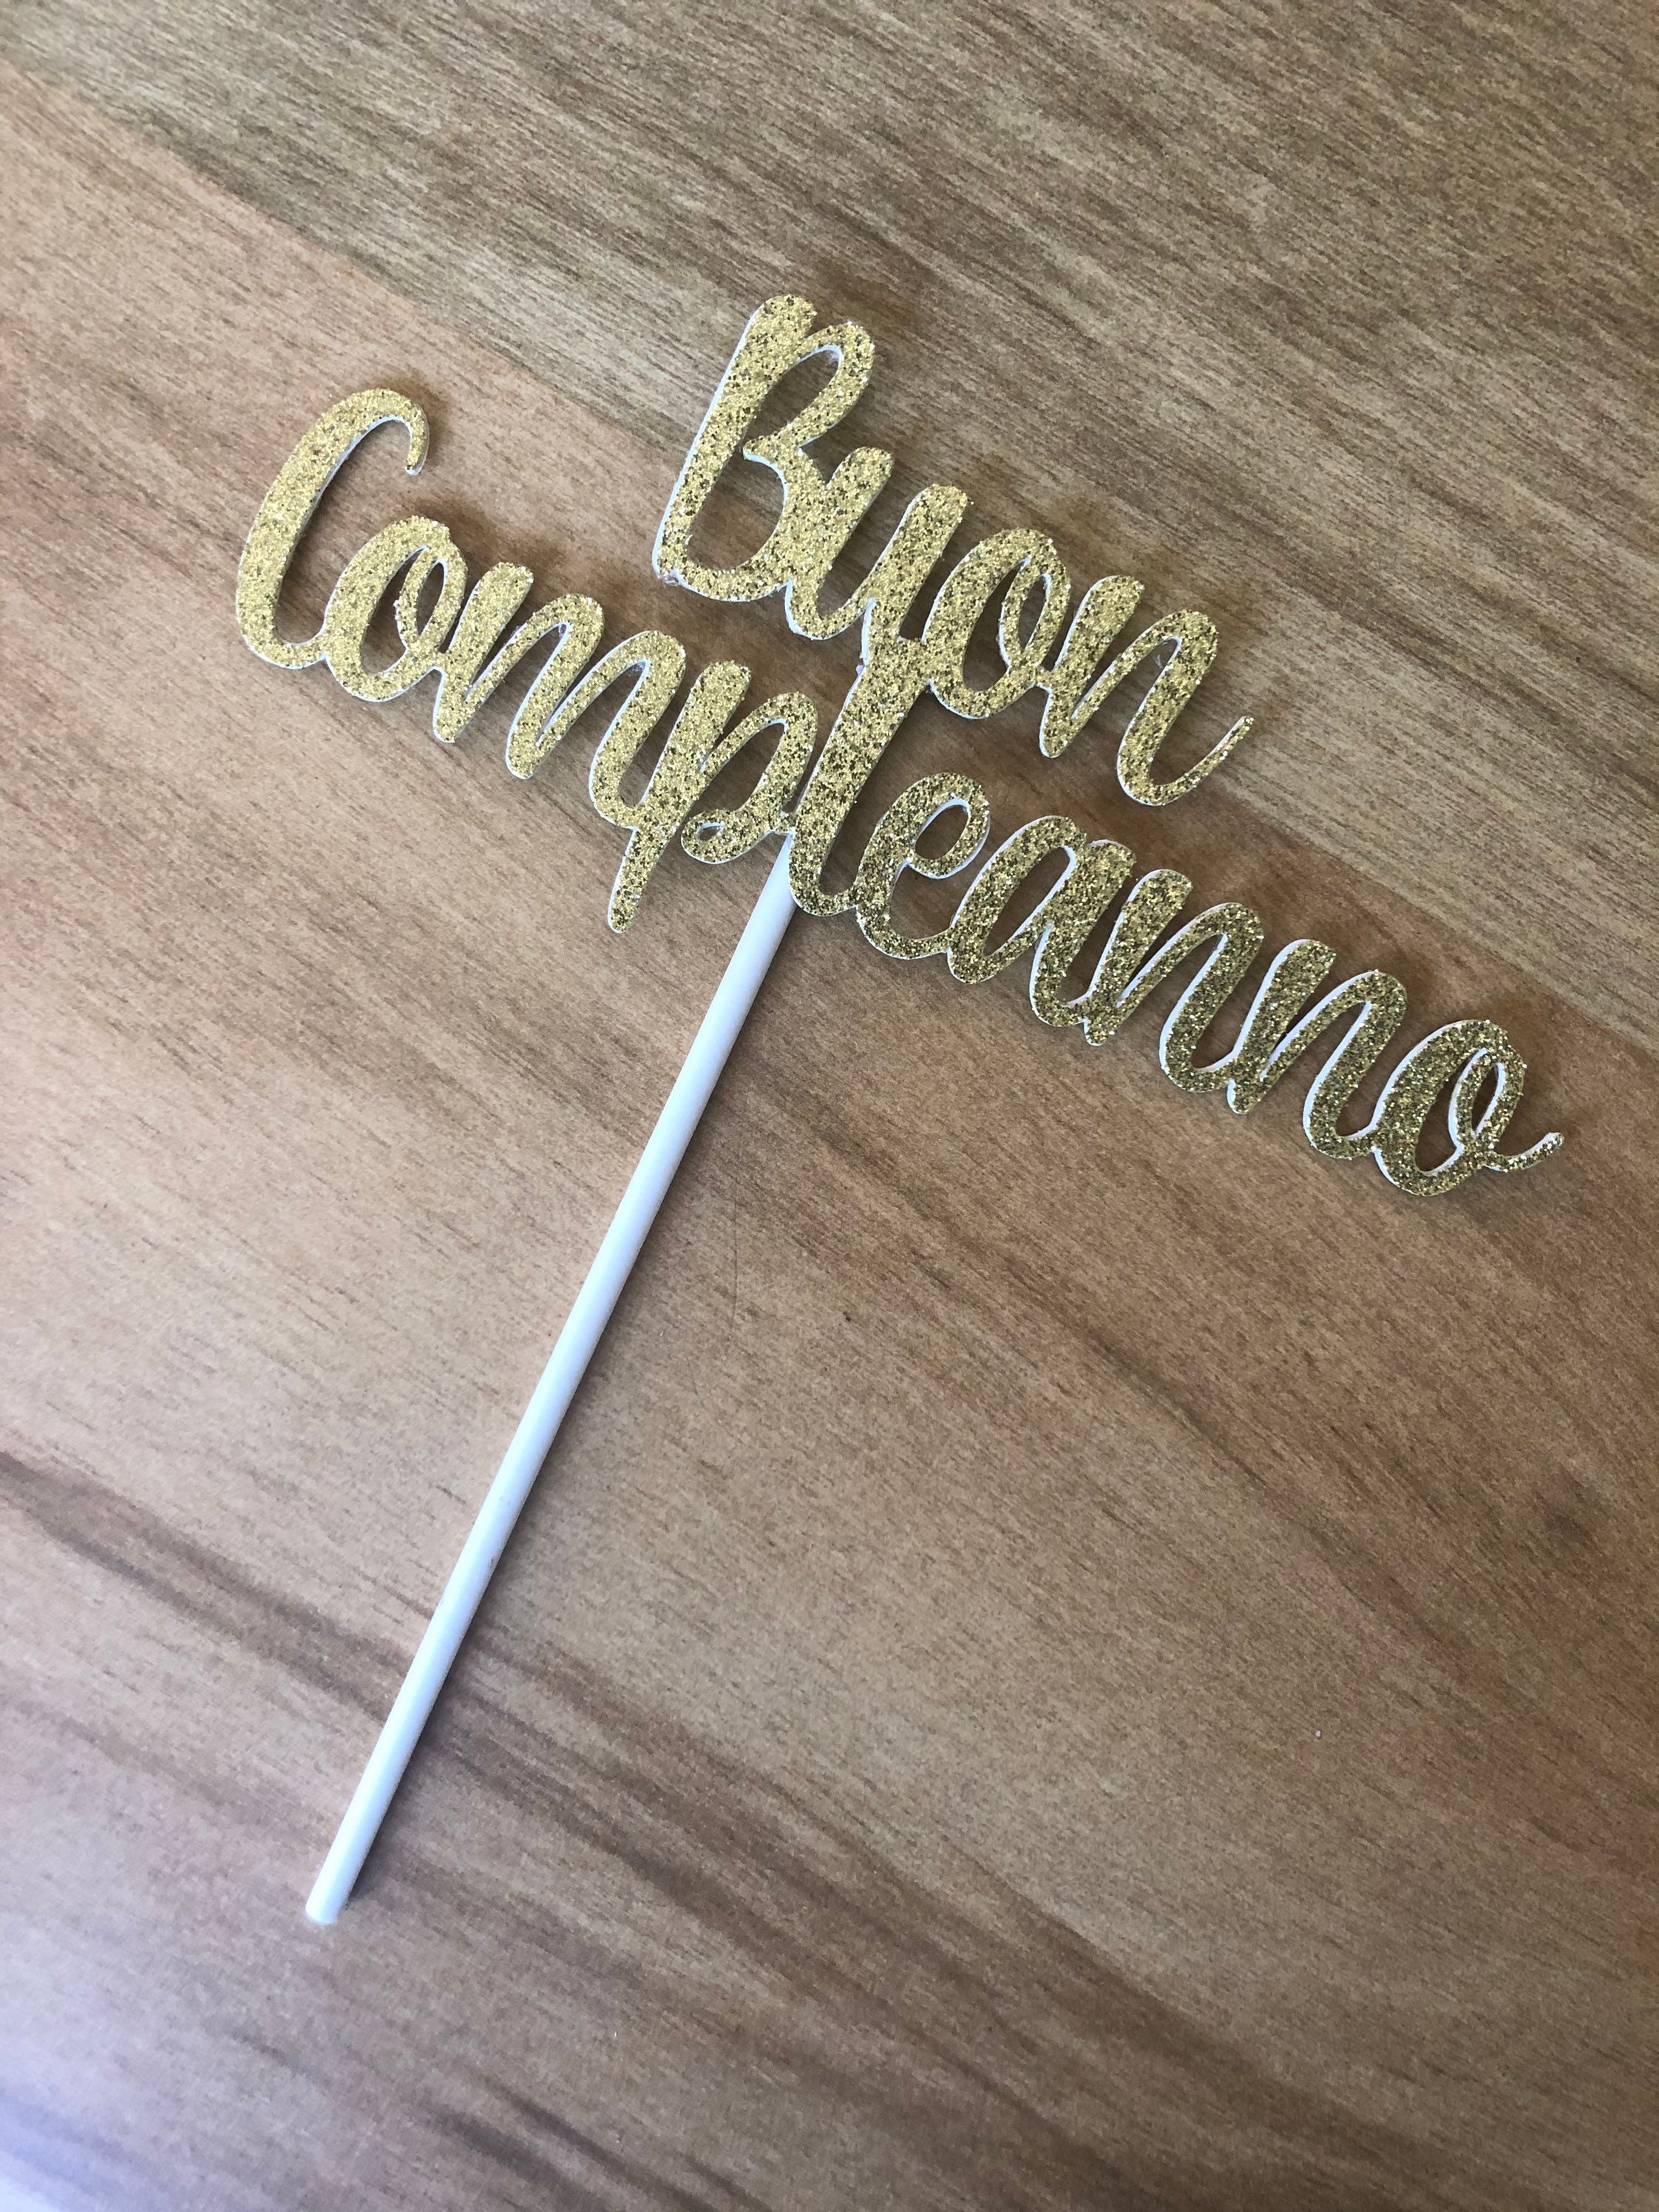  INNORU Buon Compleanno Cake Topper, Happy Birthday Cake Topper,  Italian Theme Birthday Party Decorations Supplies, Navy Blue Glitter :  Grocery & Gourmet Food